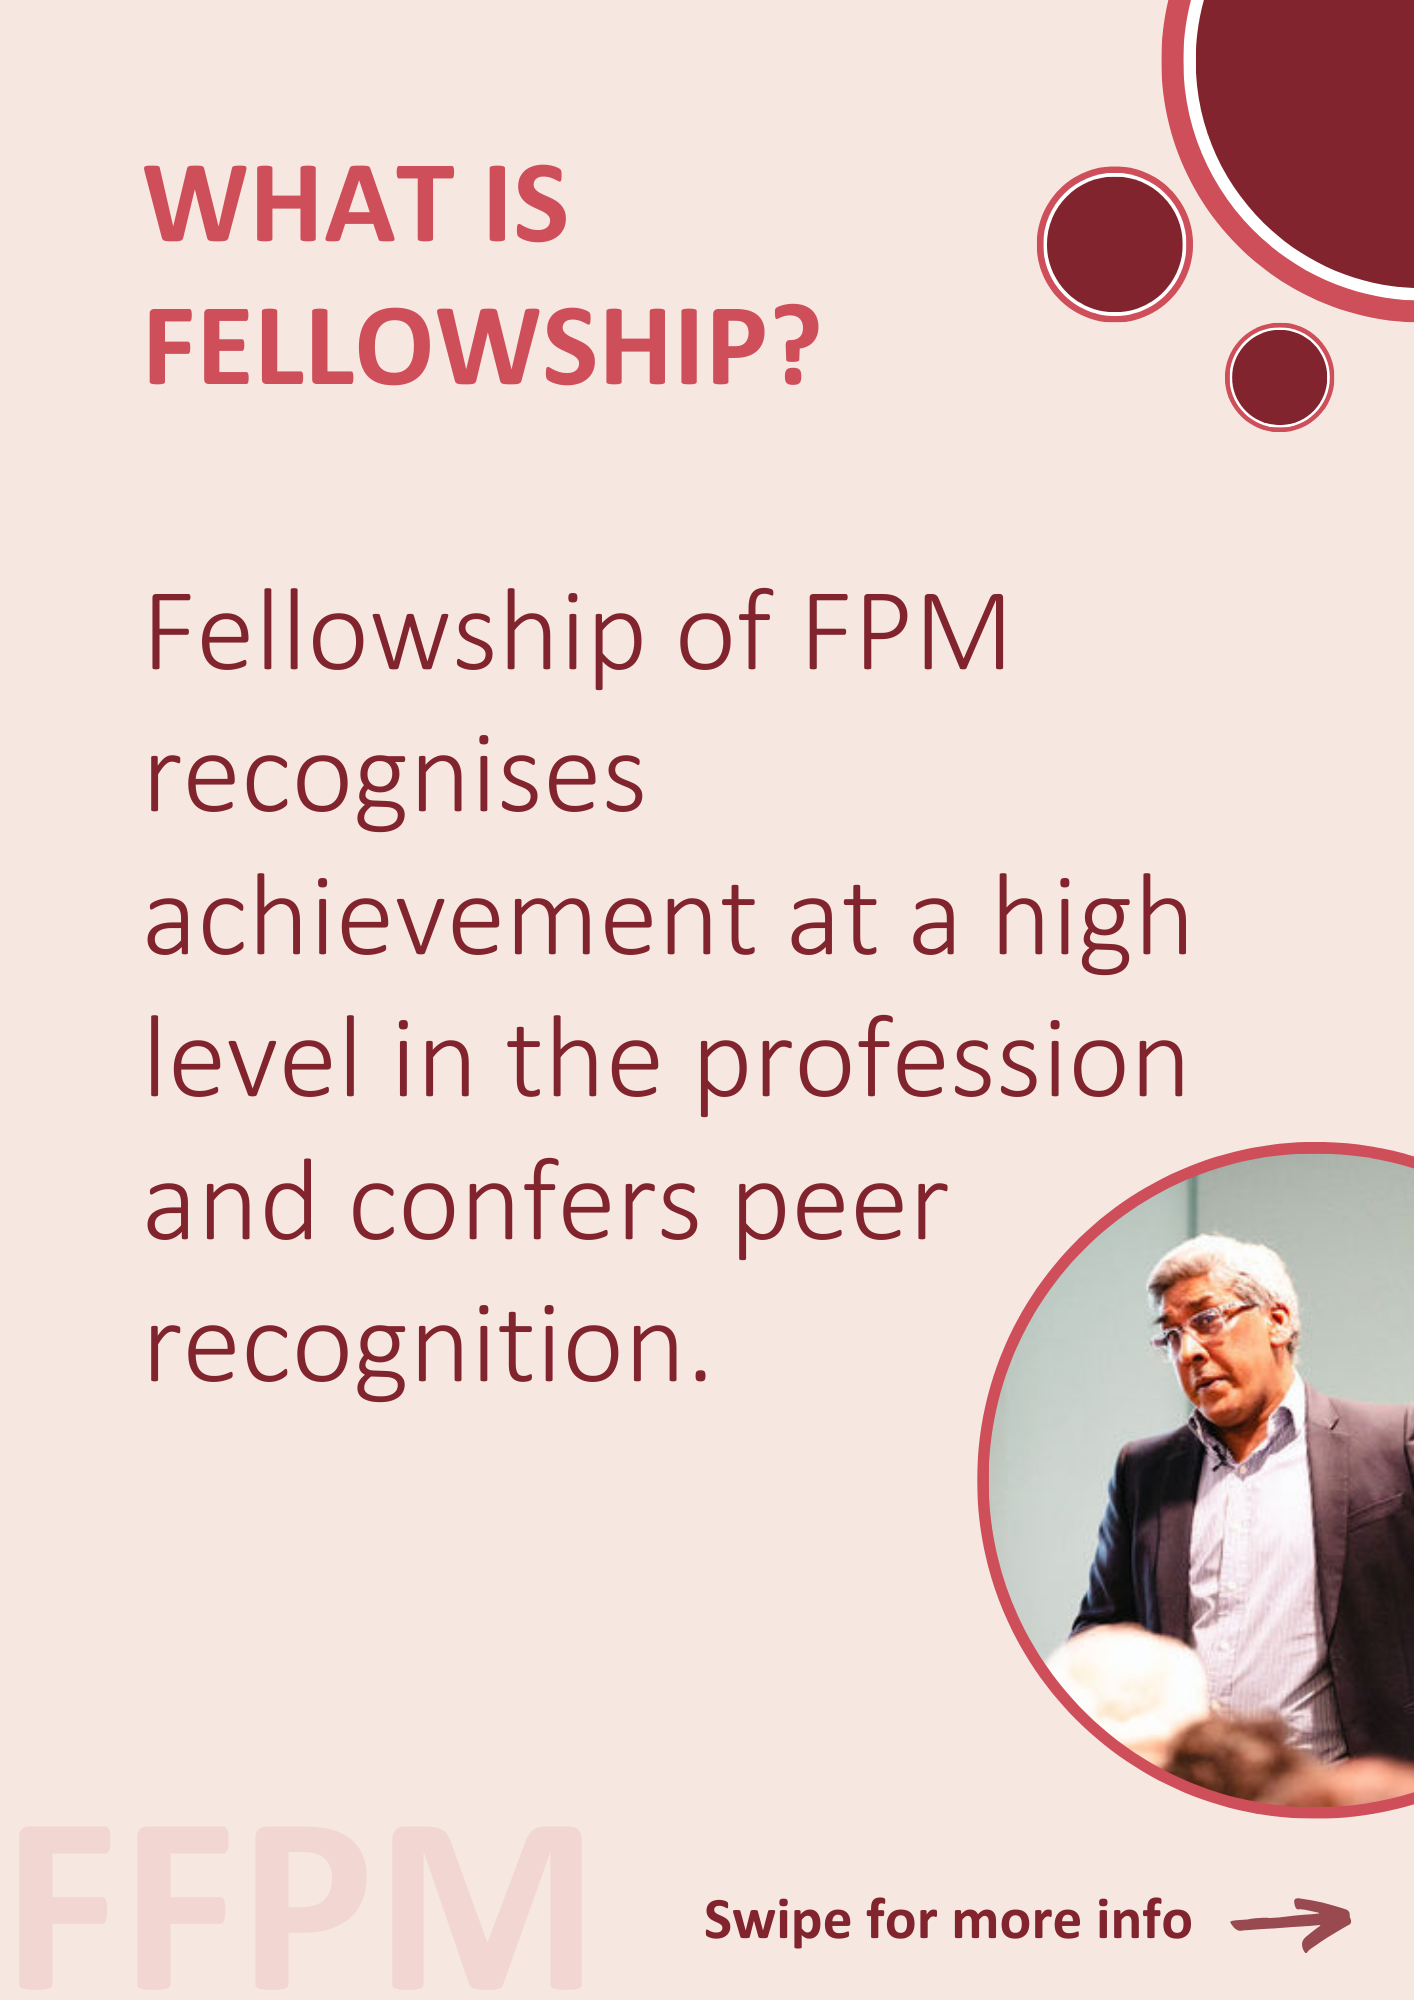 What is Fellowship? Fellowship of FPM recognises achievement at a high level in the profession and confers peer recognition.